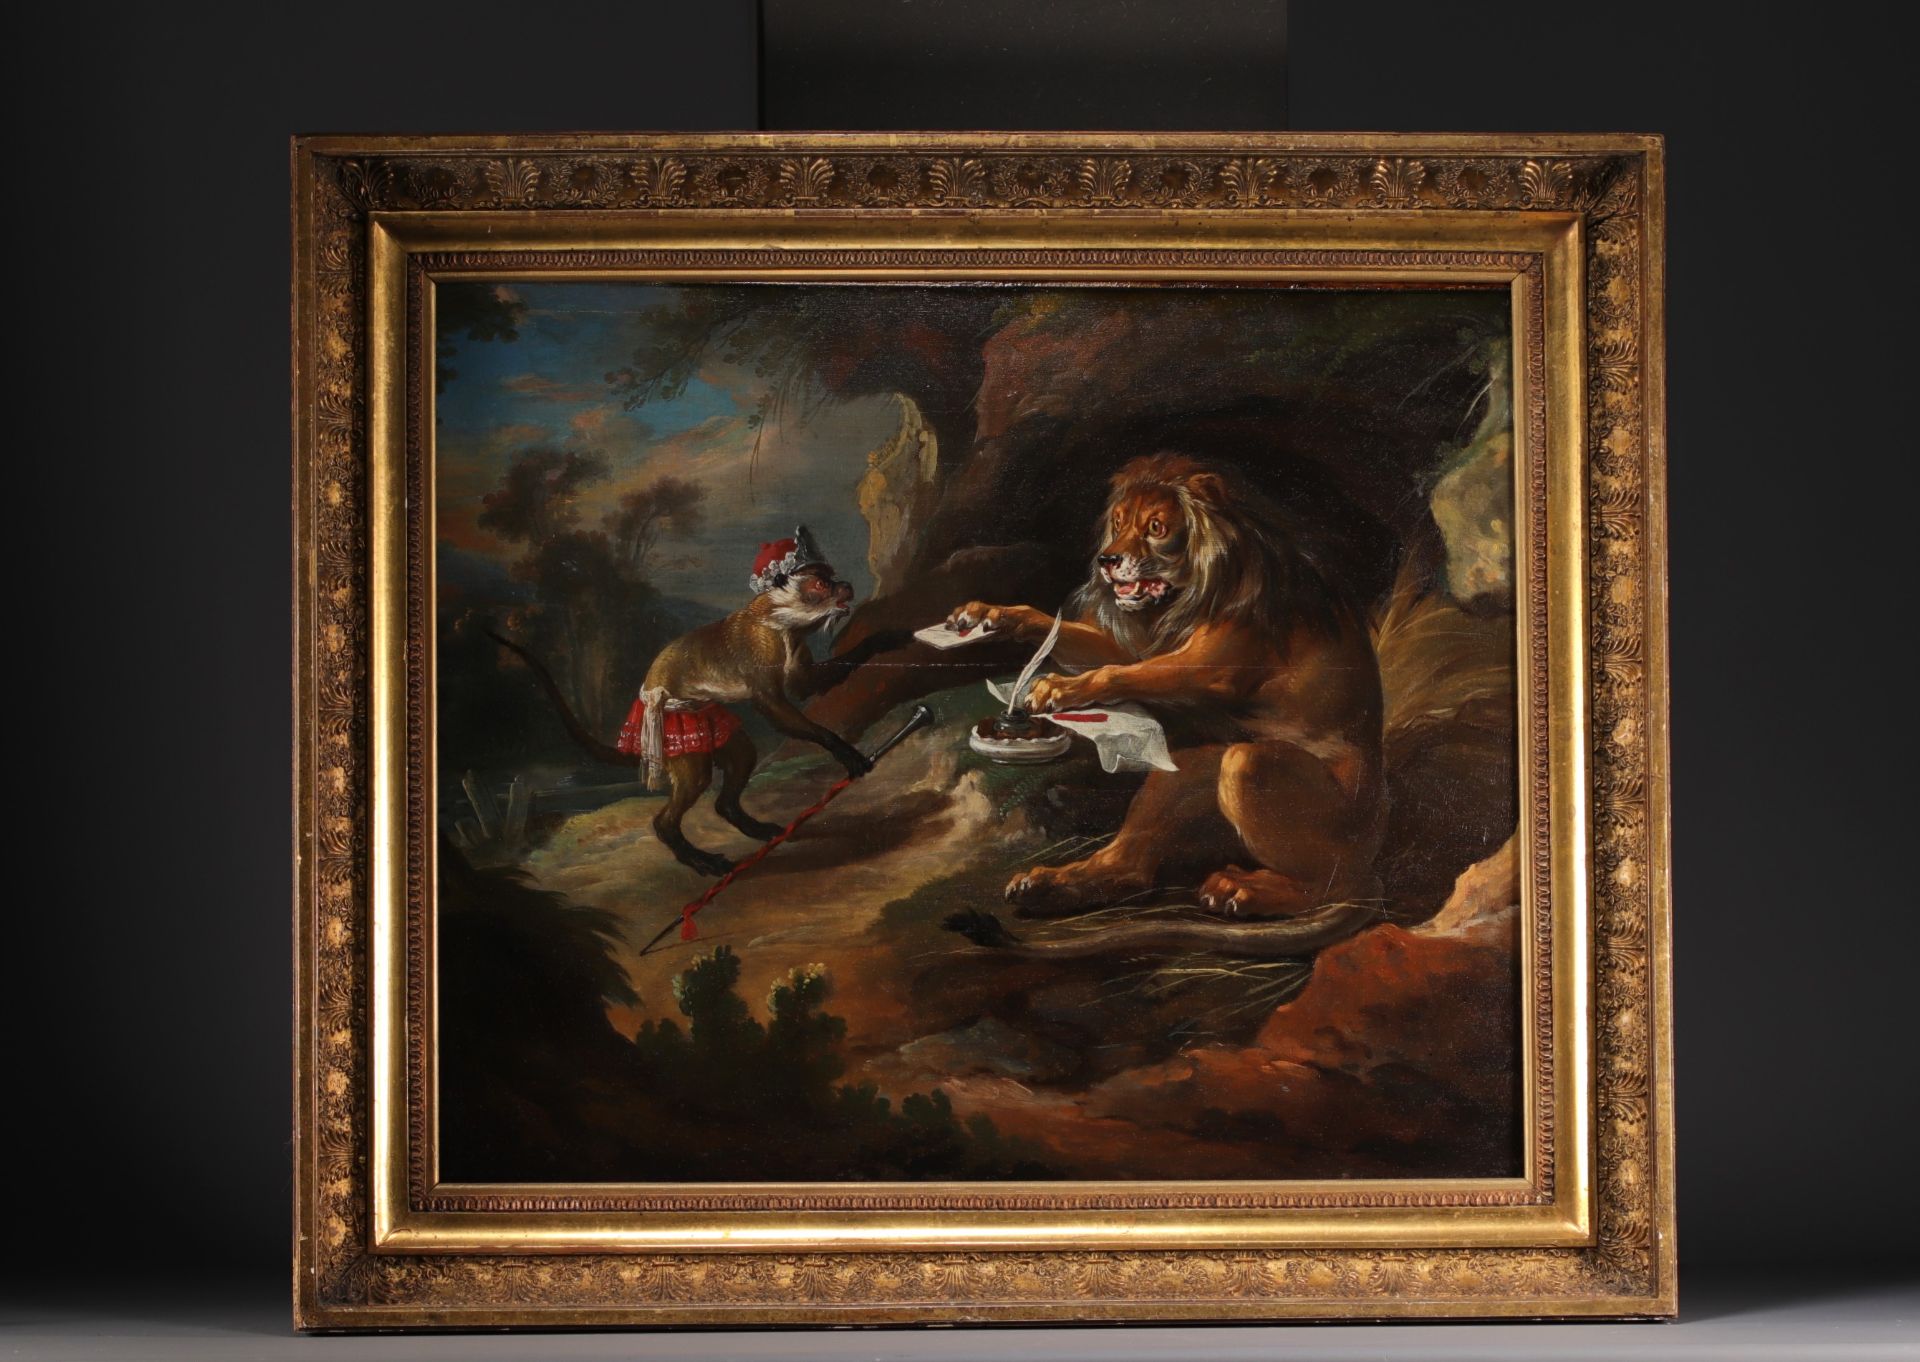 David TENIERS LE JEUNE (1610-1690) Entourage of "The Lion and the Monkey" Oil on panel, 17th century - Image 2 of 2